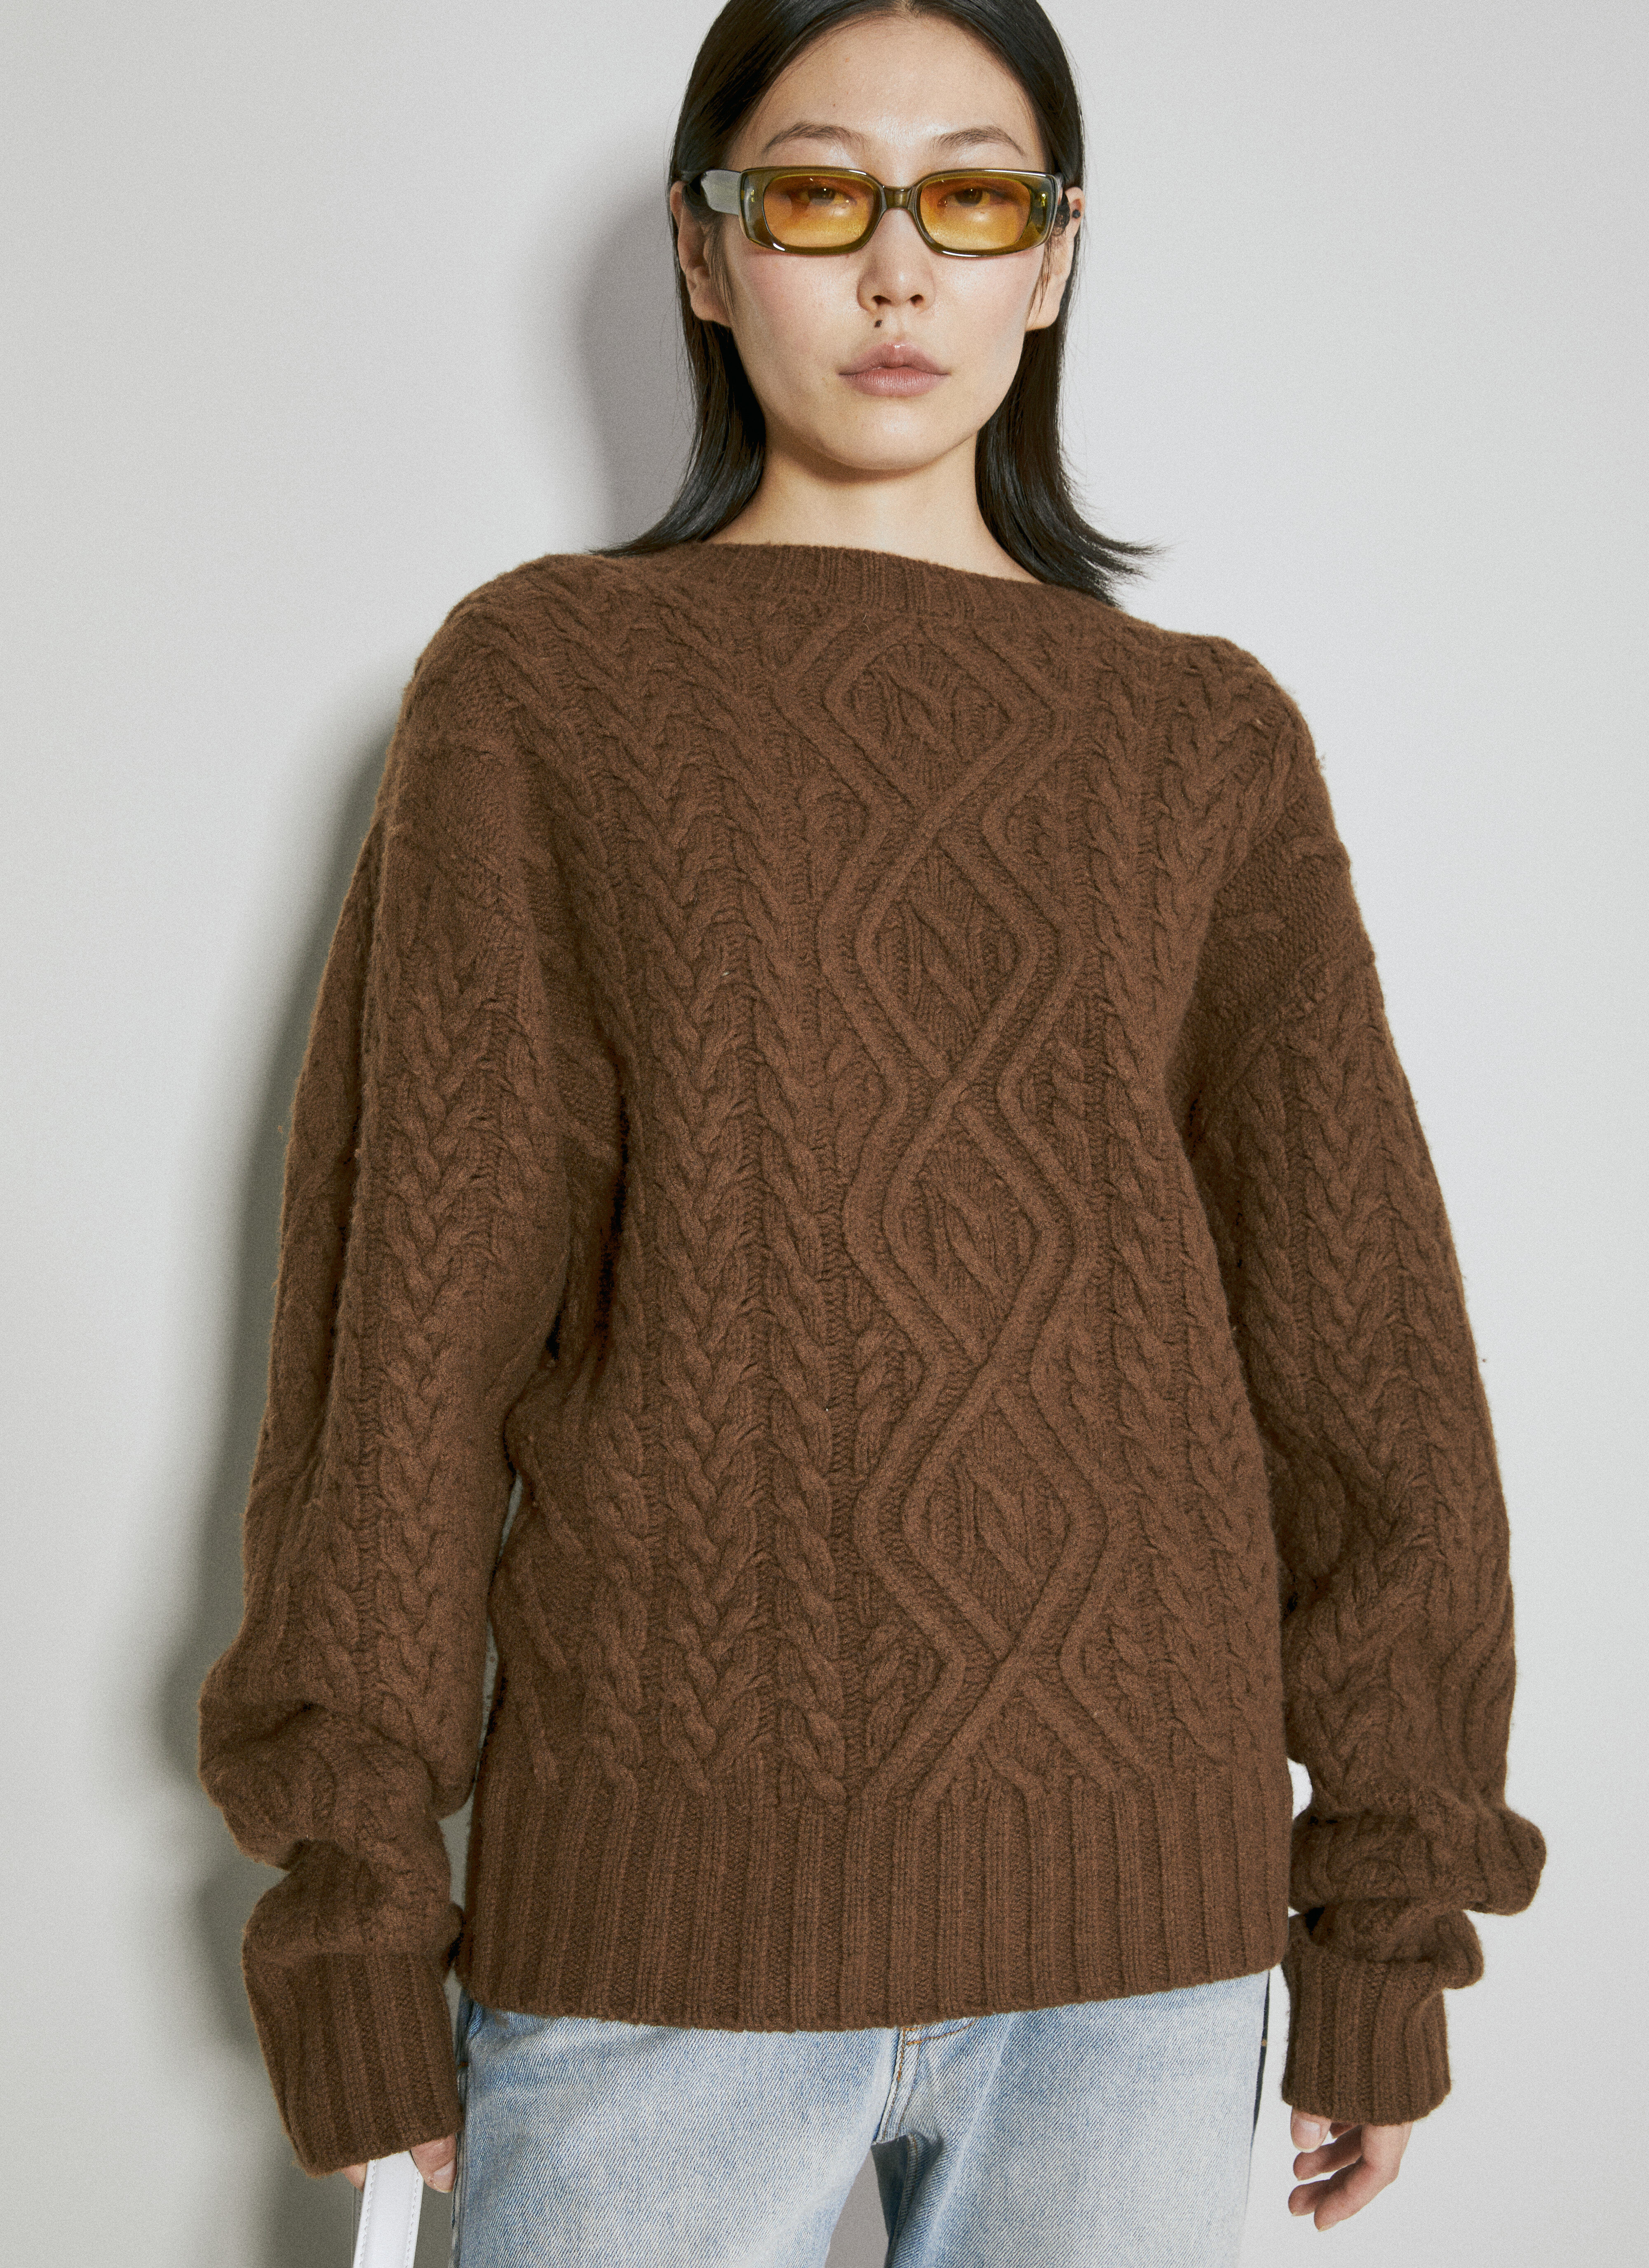 Martine Rose Wool Cable Knit Sweater Blue mtr0255004